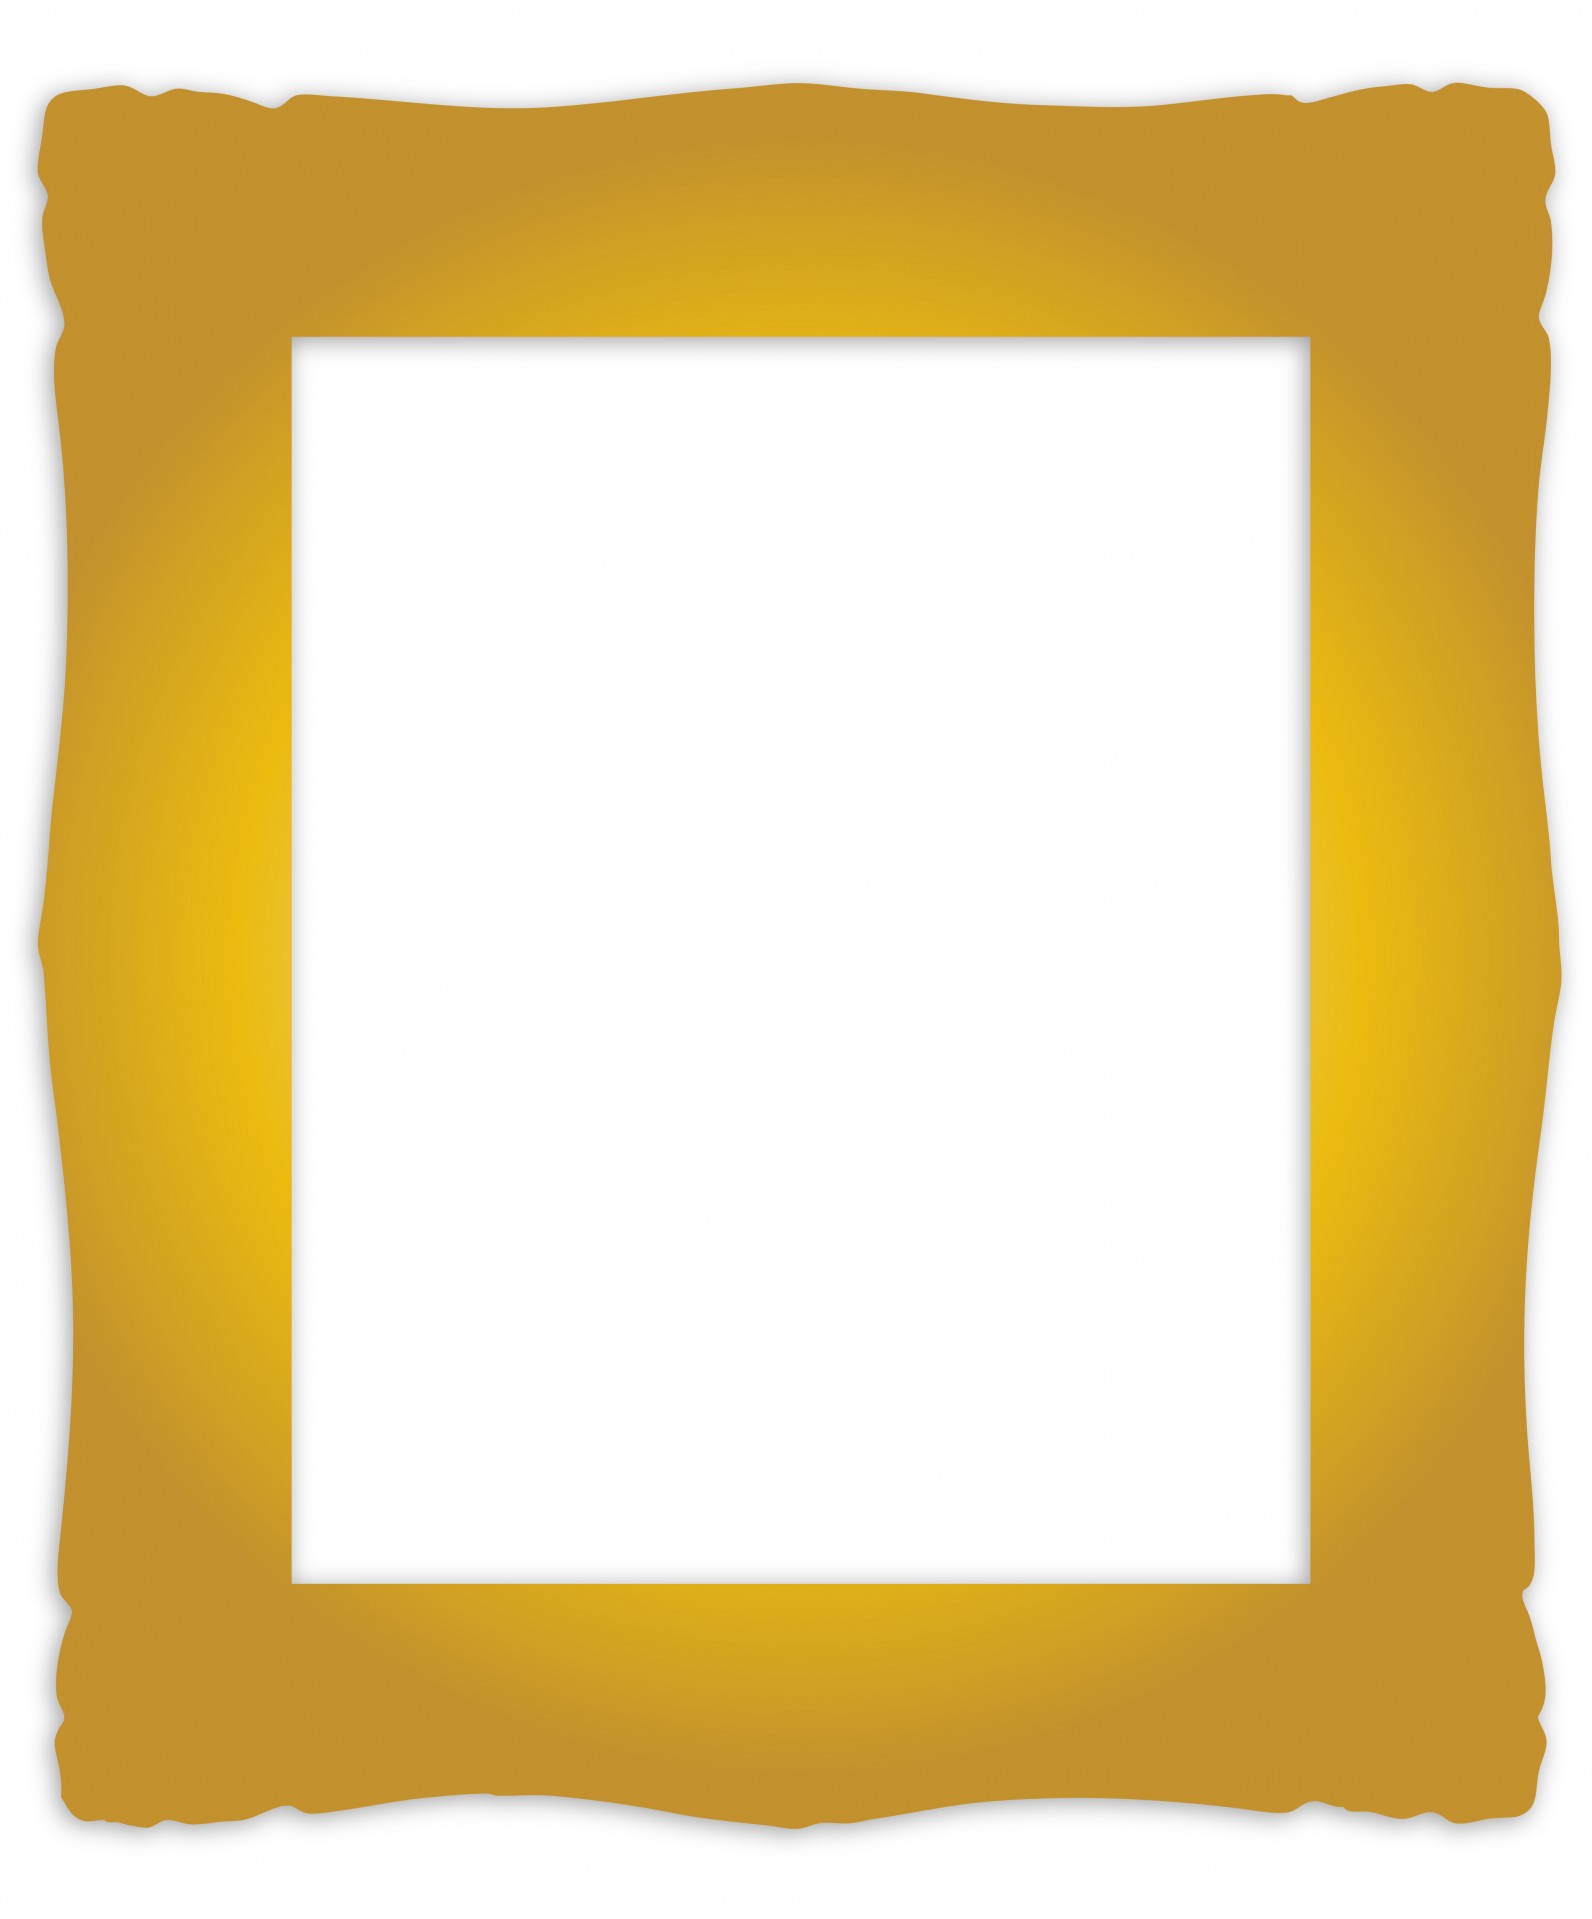 clipart gold picture frames - photo #6